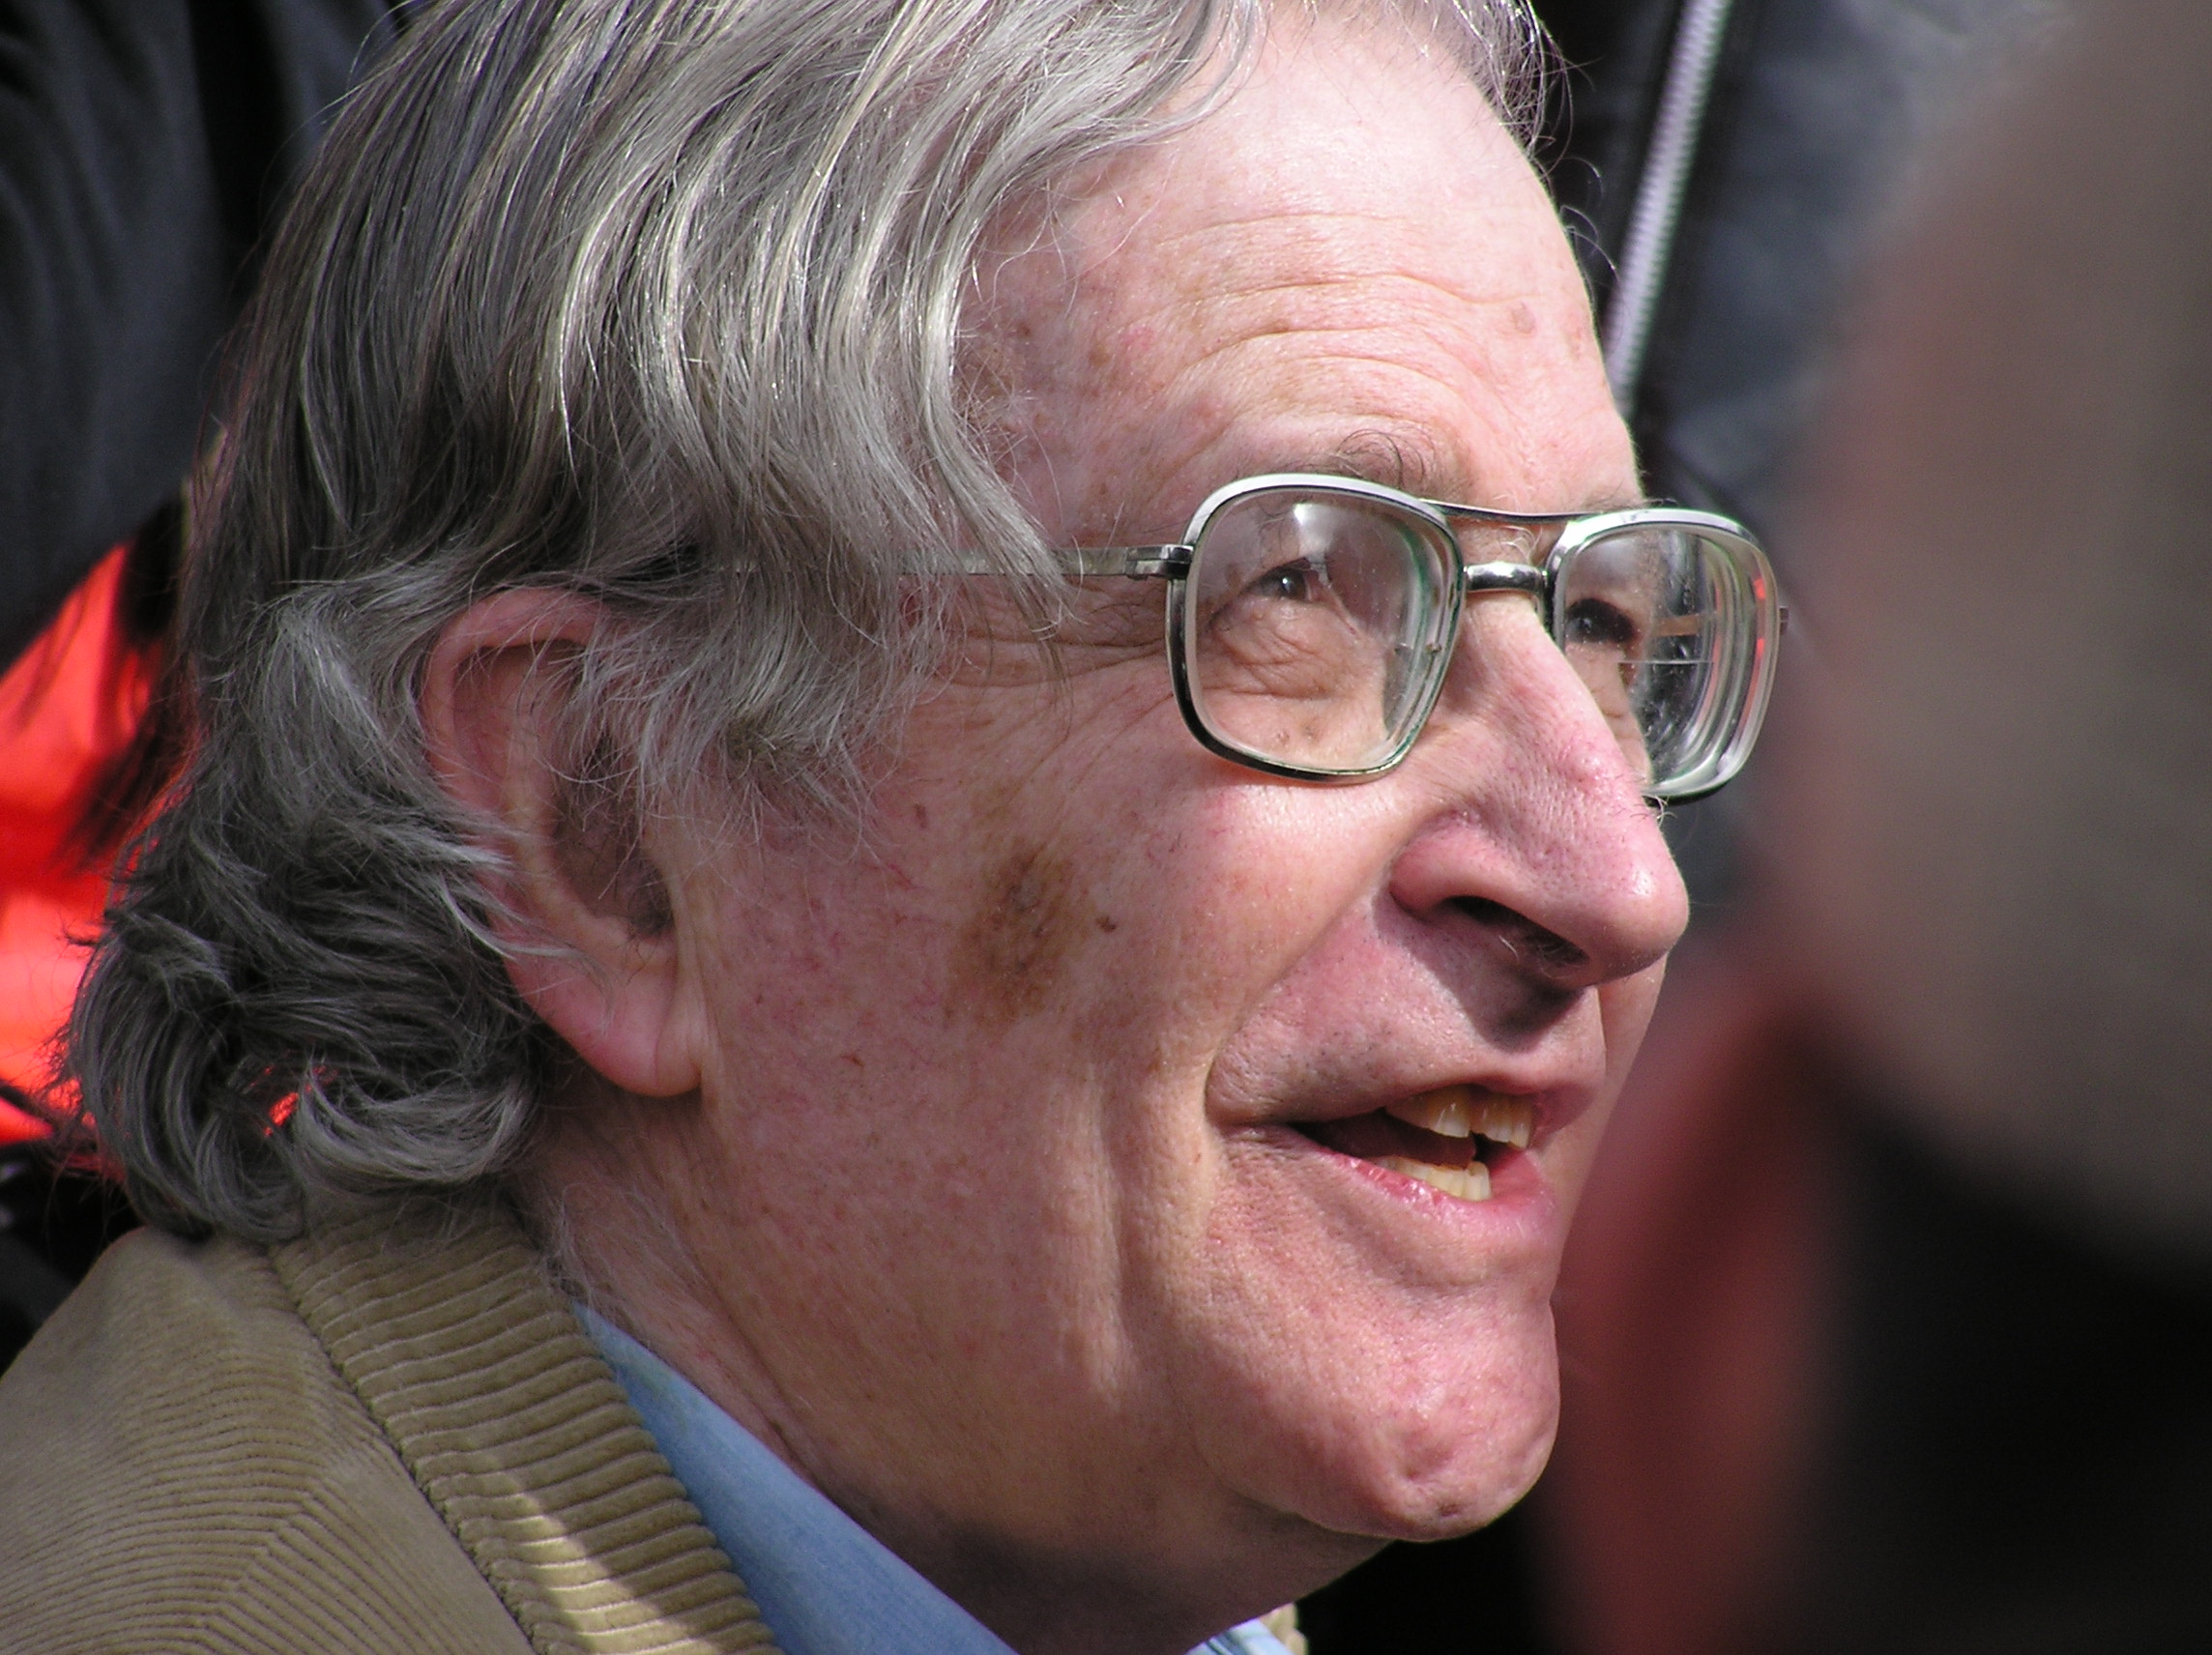 Fund Drive Special: Noam Chomsky on the Media